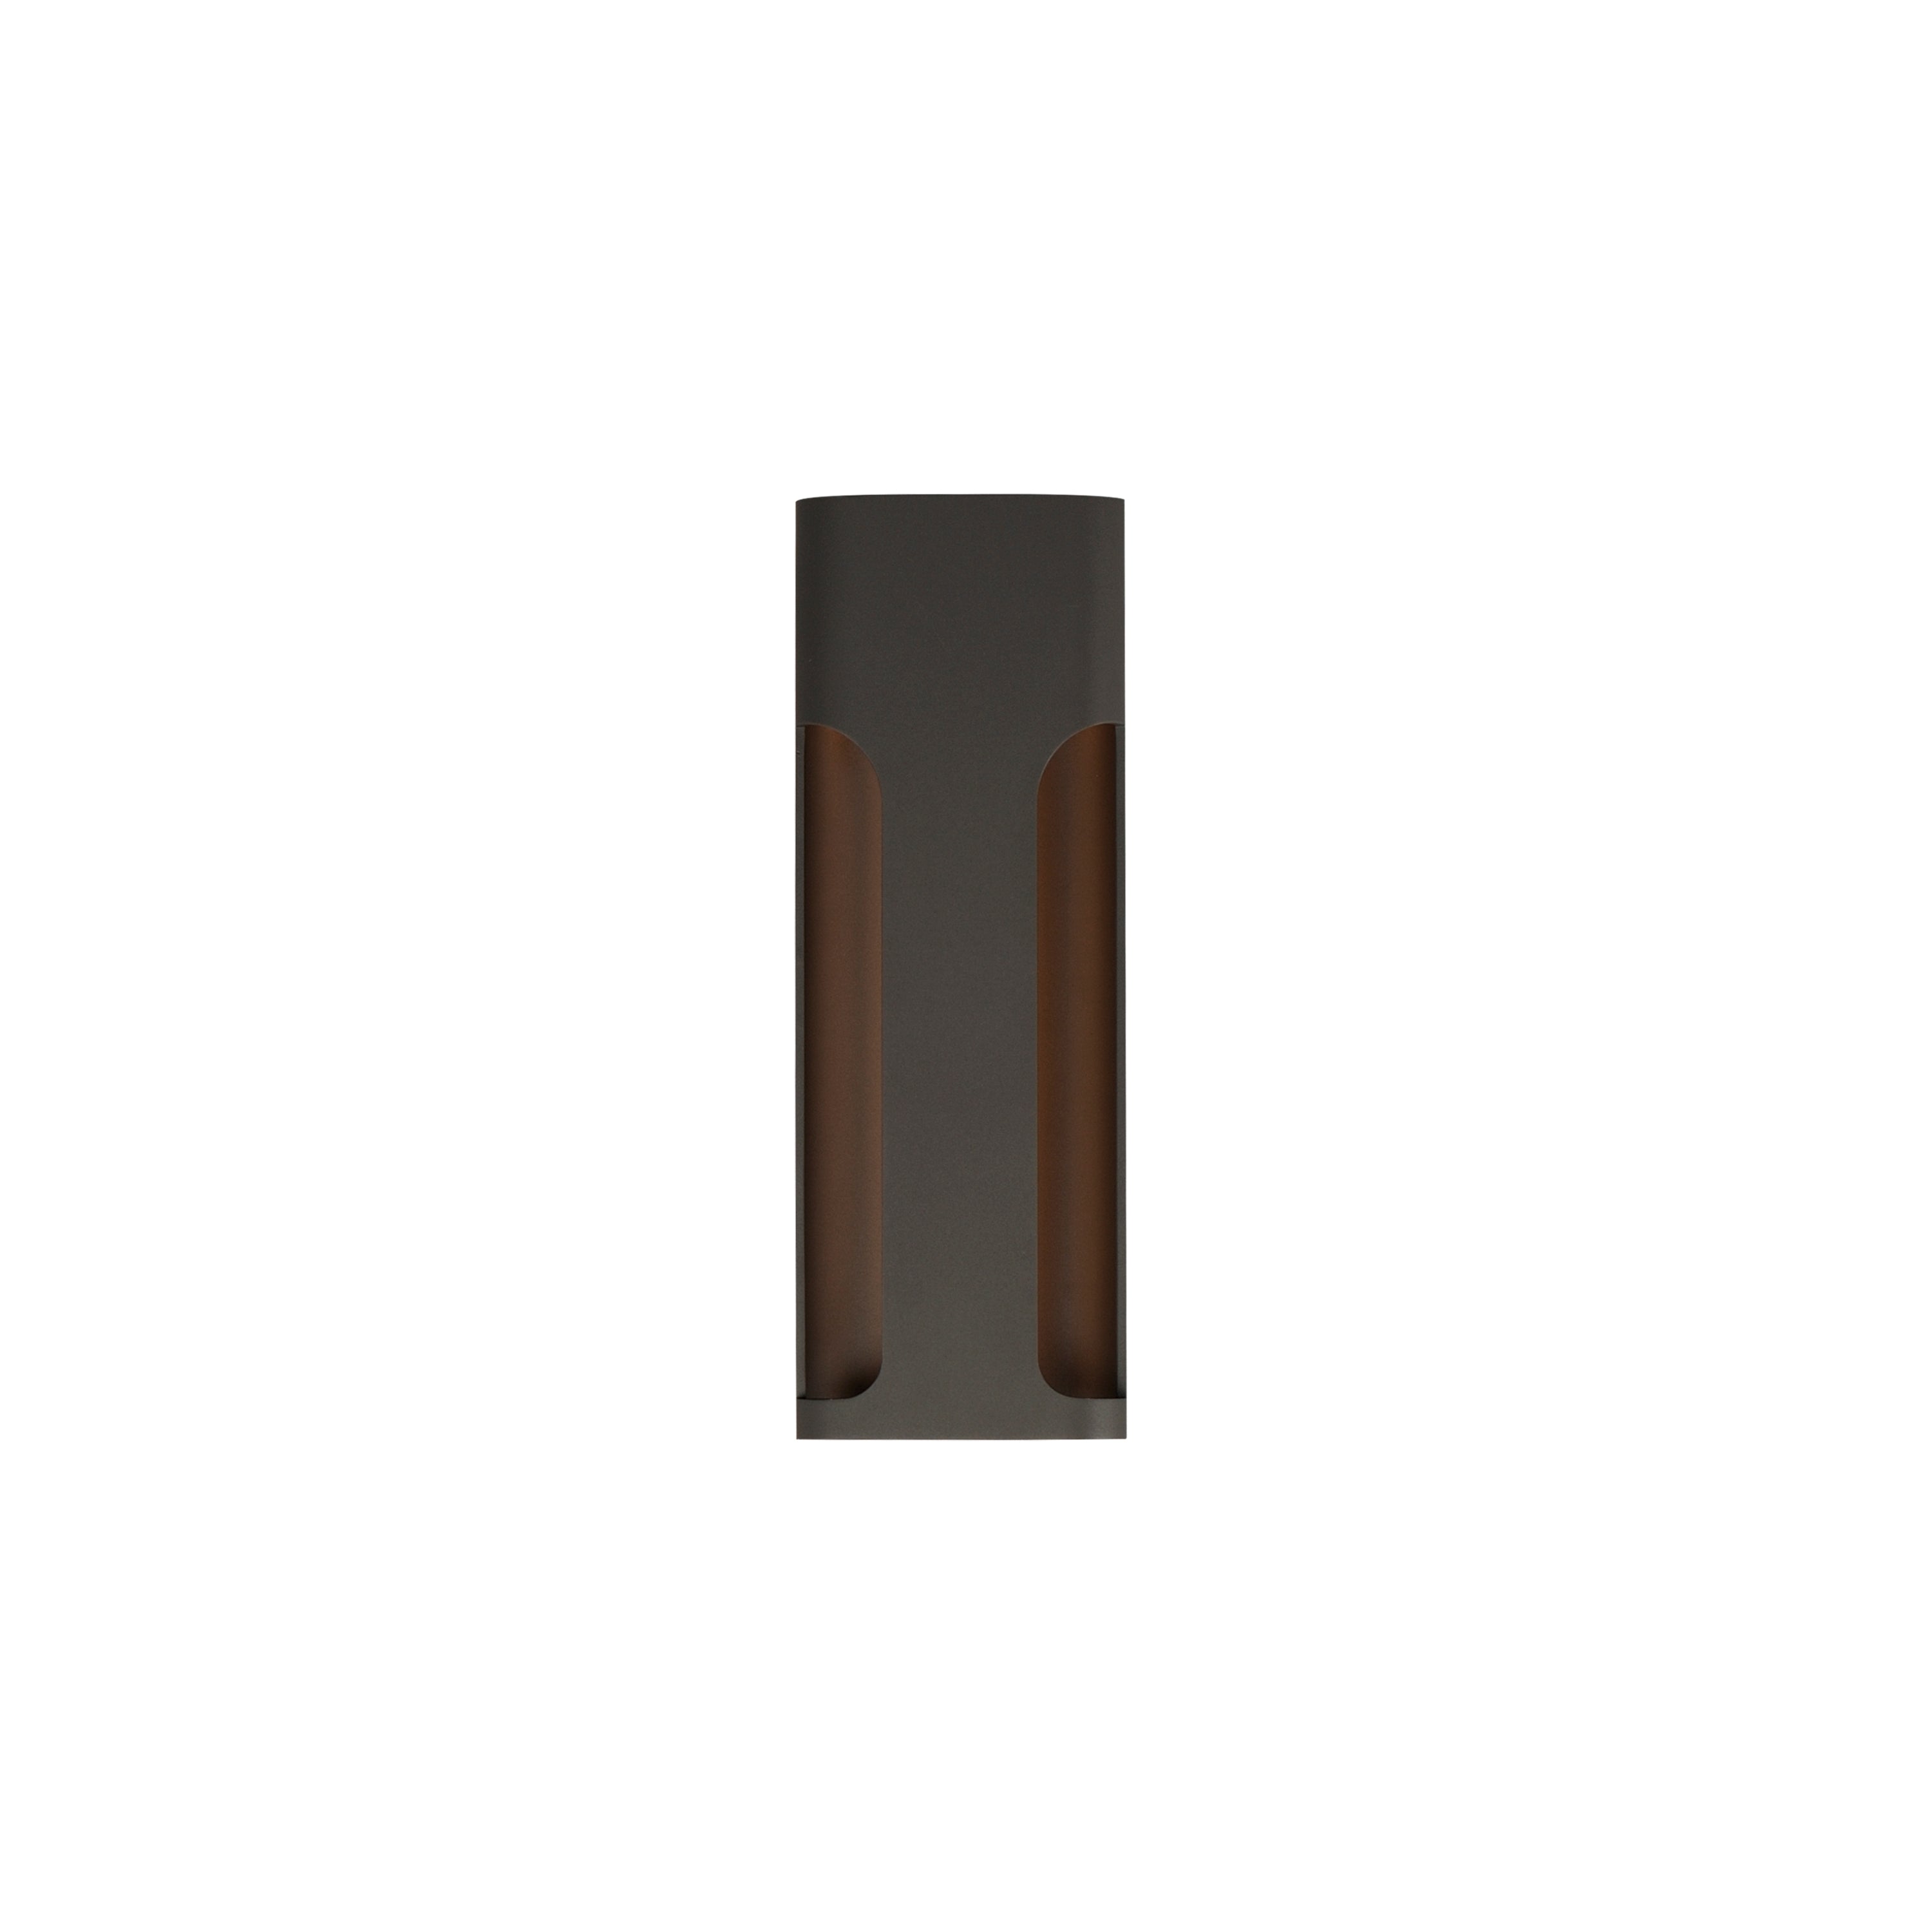 Maglev-Outdoor Wall Mount Outdoor l Wall ET2 x6.25x17.75 Architectural Bronze 